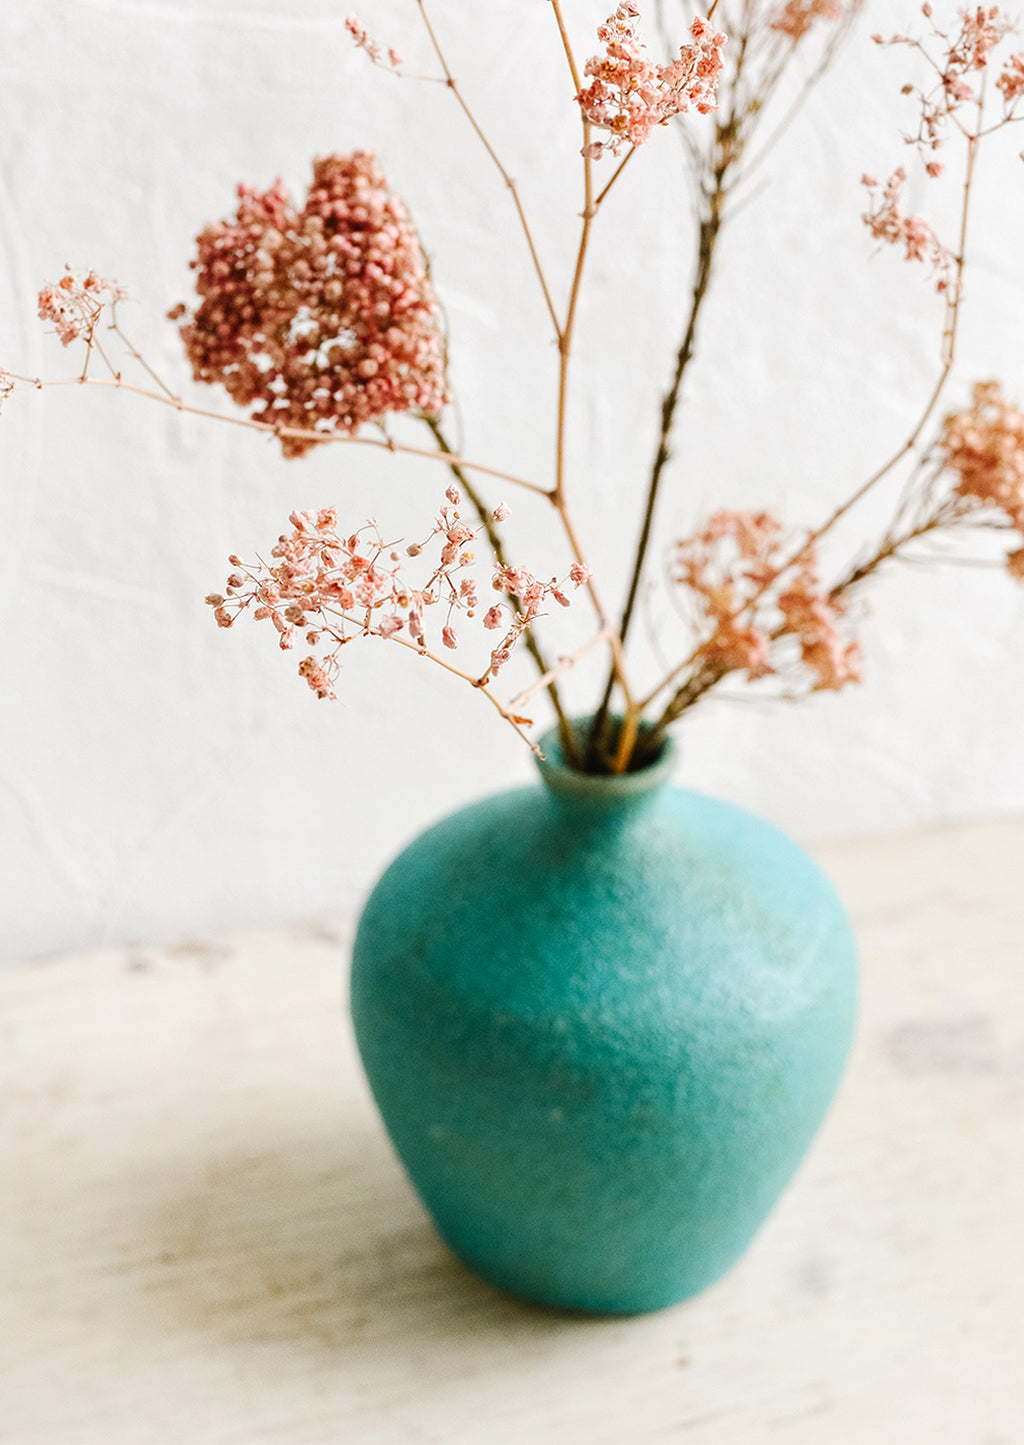 2: A textured turquoise ceramic vase with dried pink flowers inside.